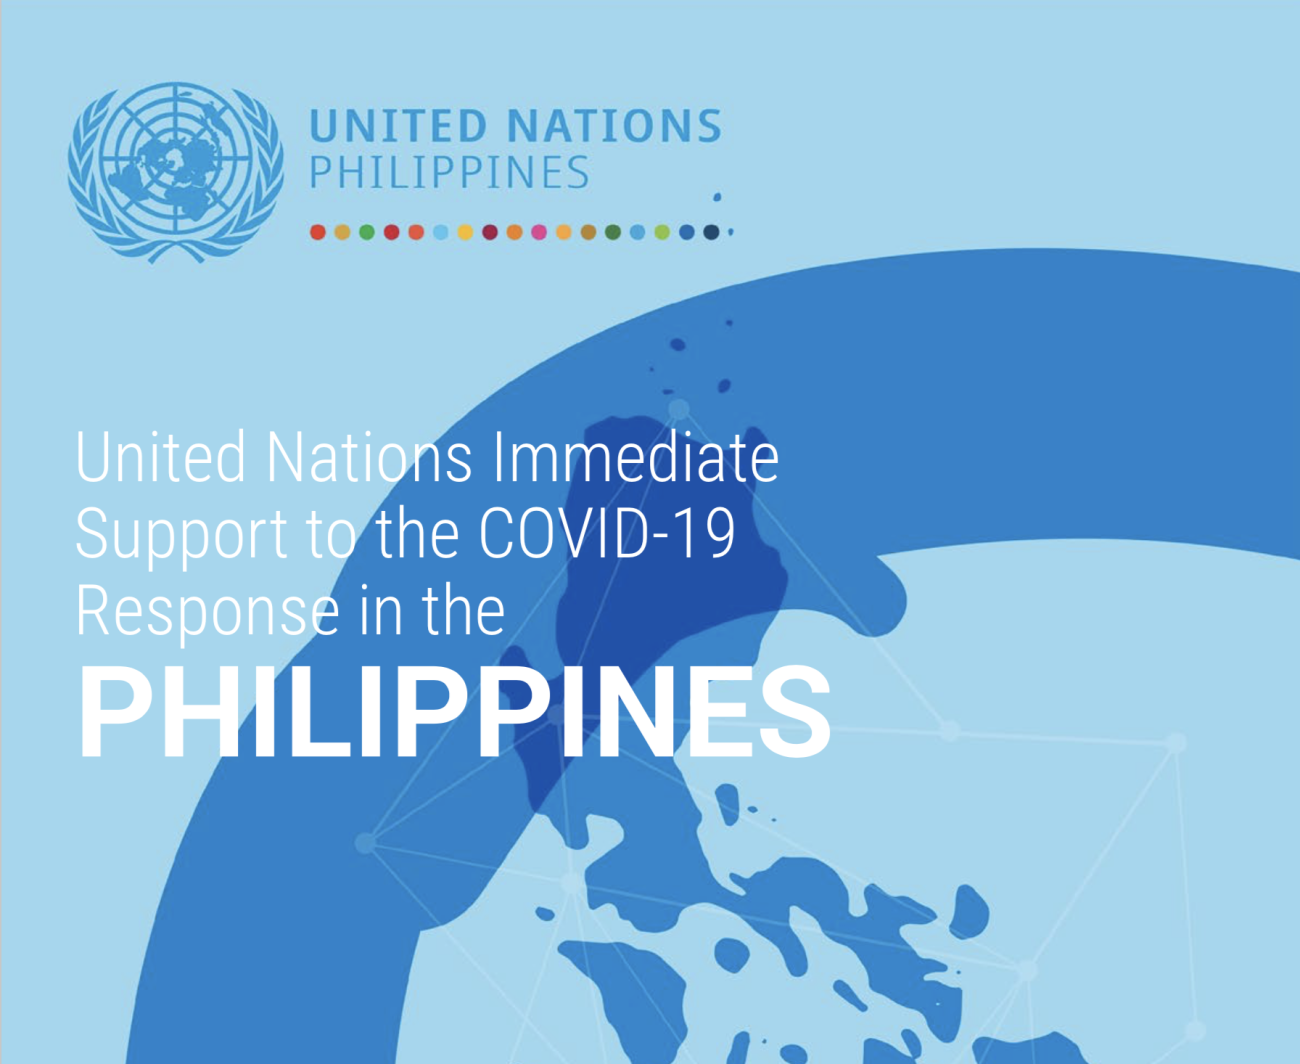 UN immediate support to COVID-19 response in the Philippines